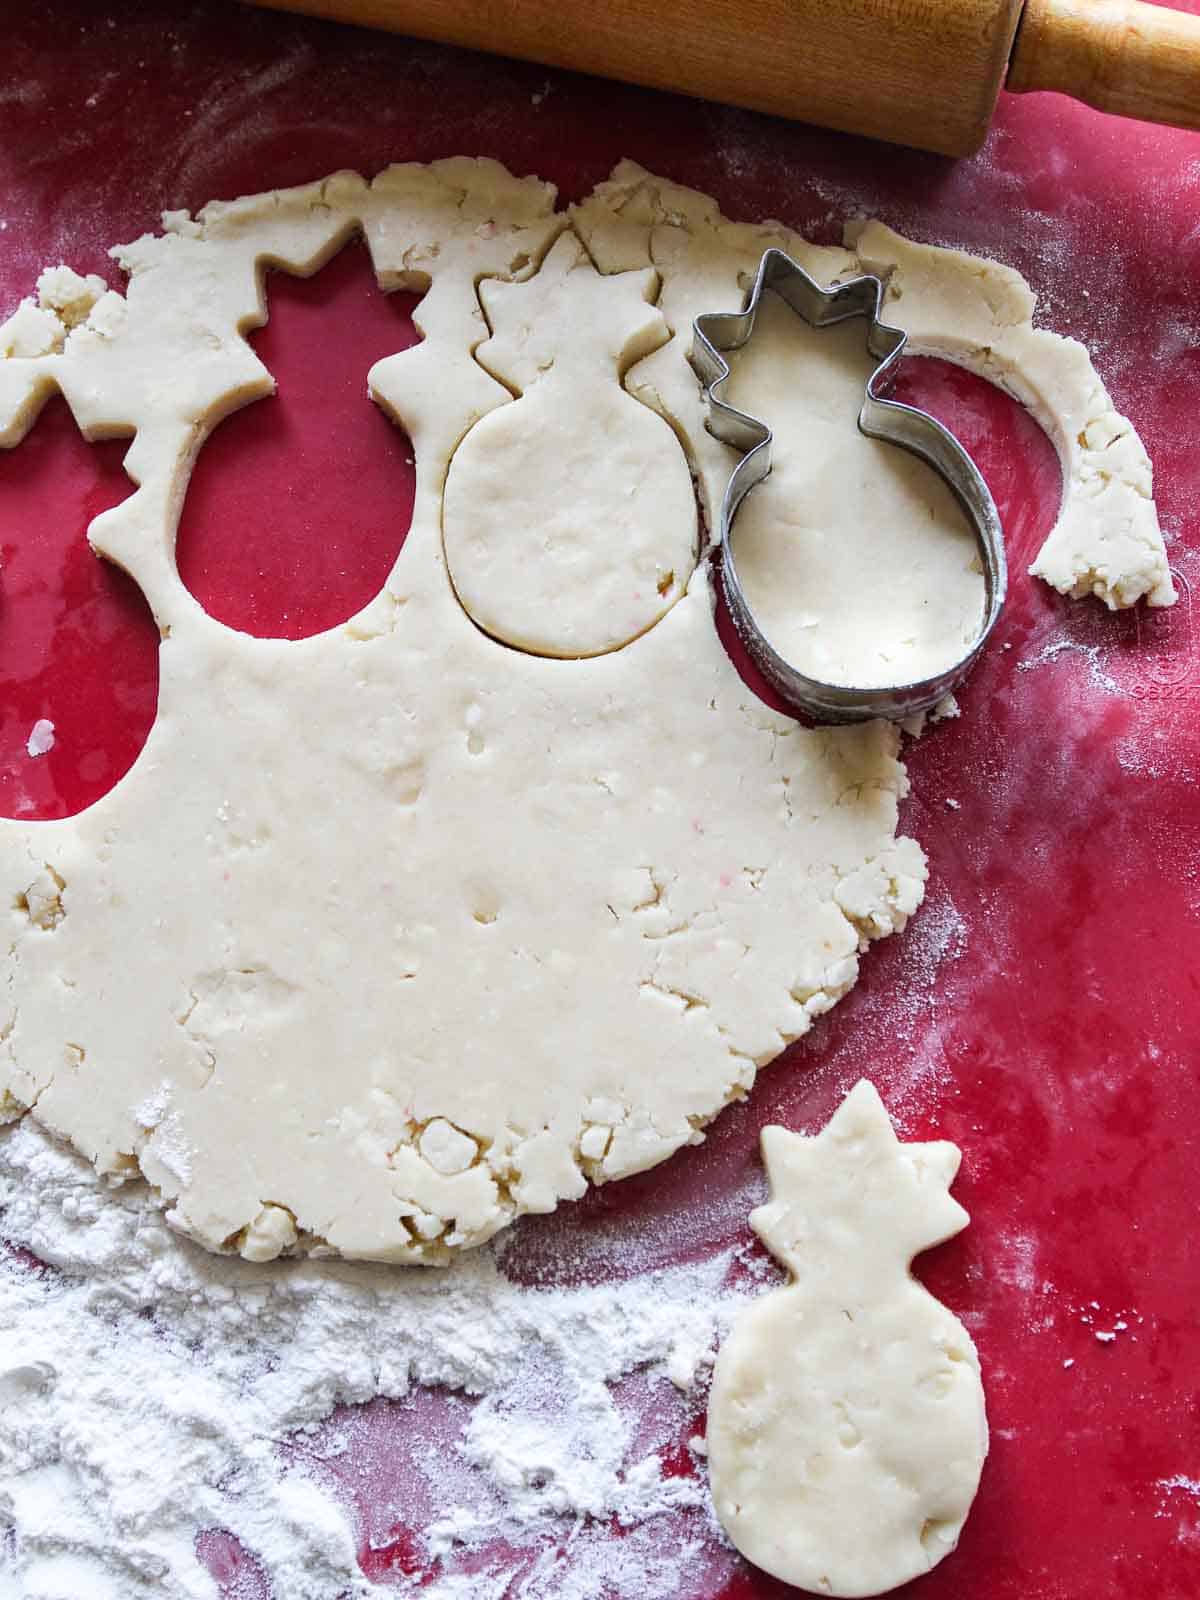 A pineapple shaped cookie cutter on a red cutting board making cookies.